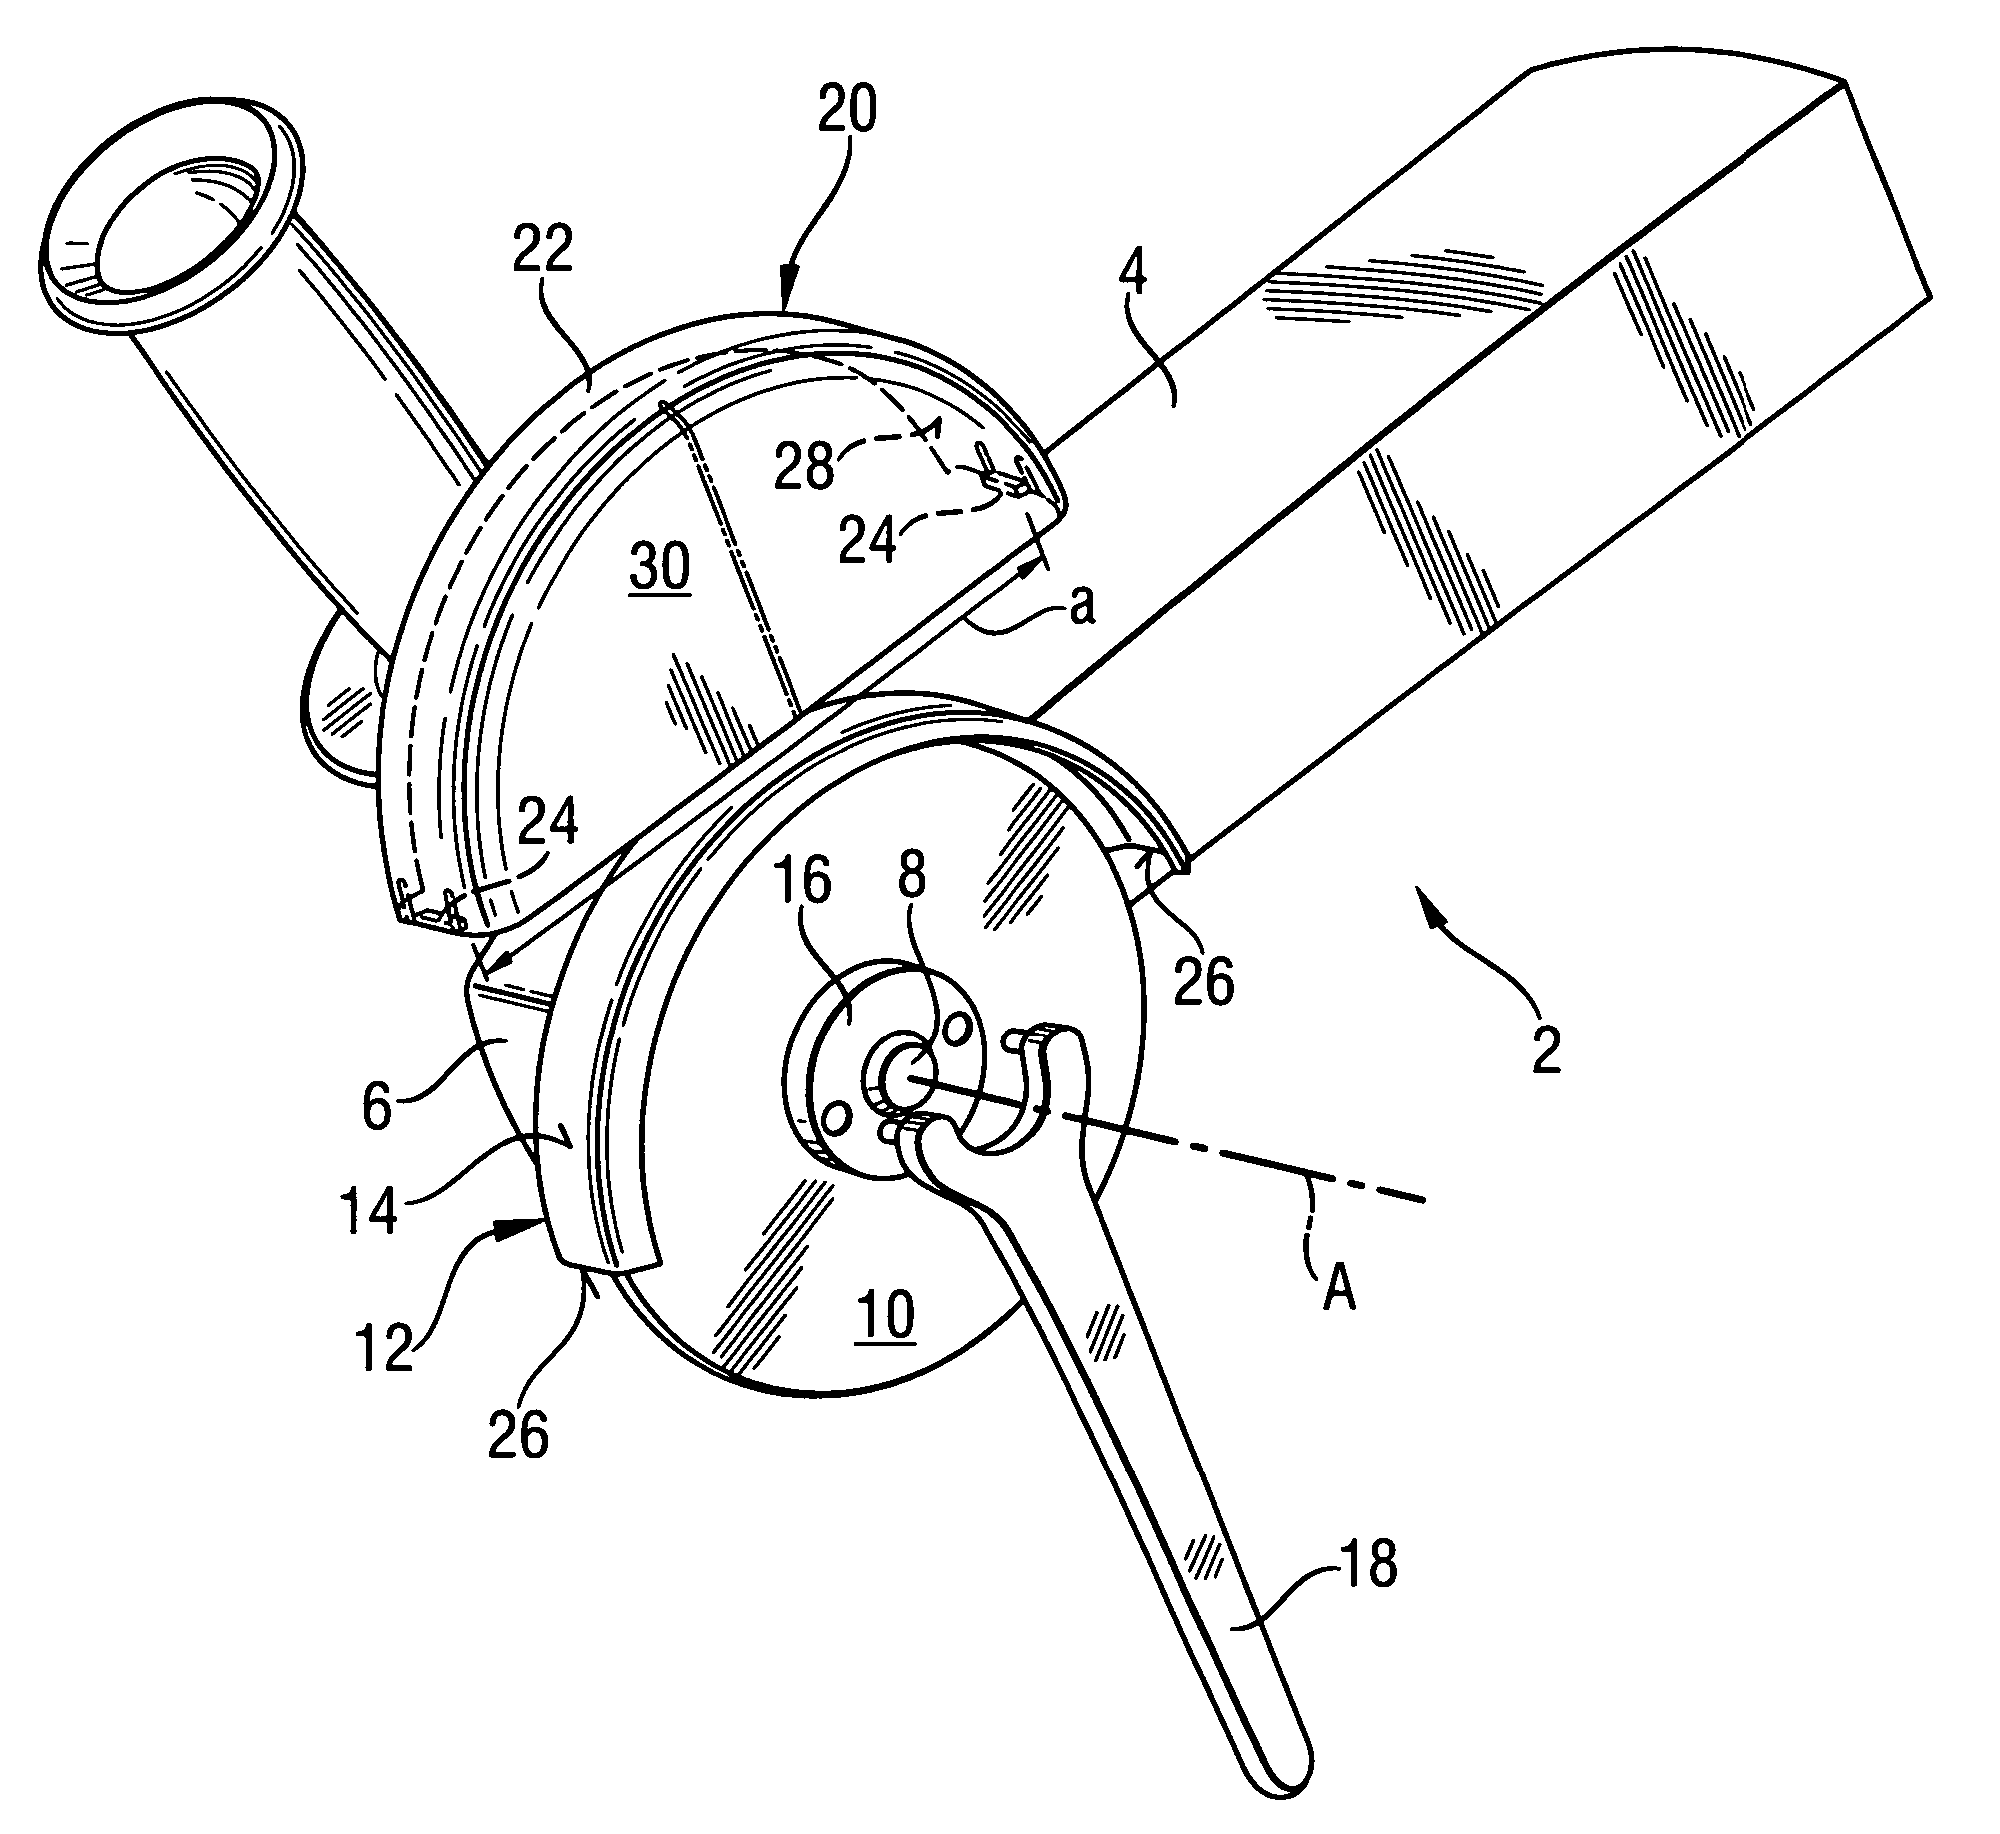 Cover device for a power tool